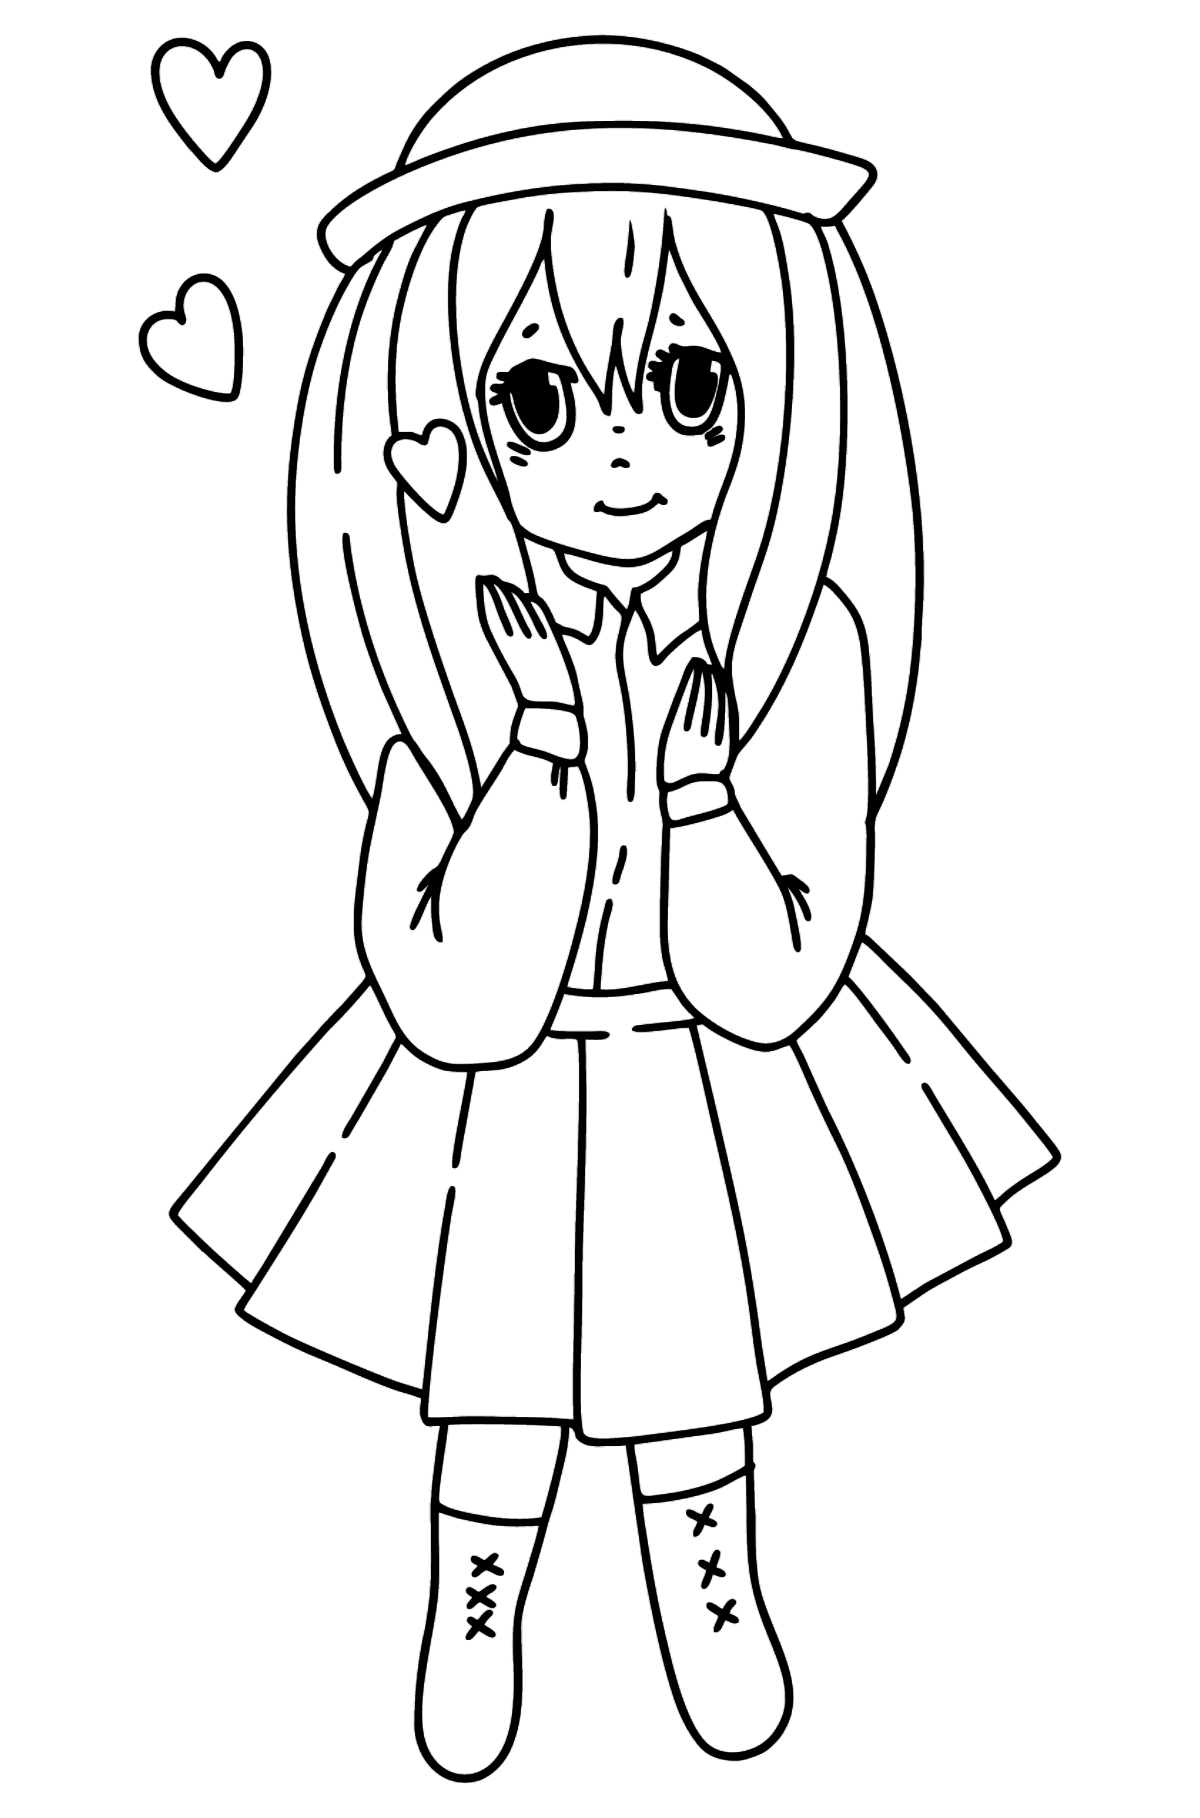 Anime girl in love coloring page ♥ Online and Print for Free